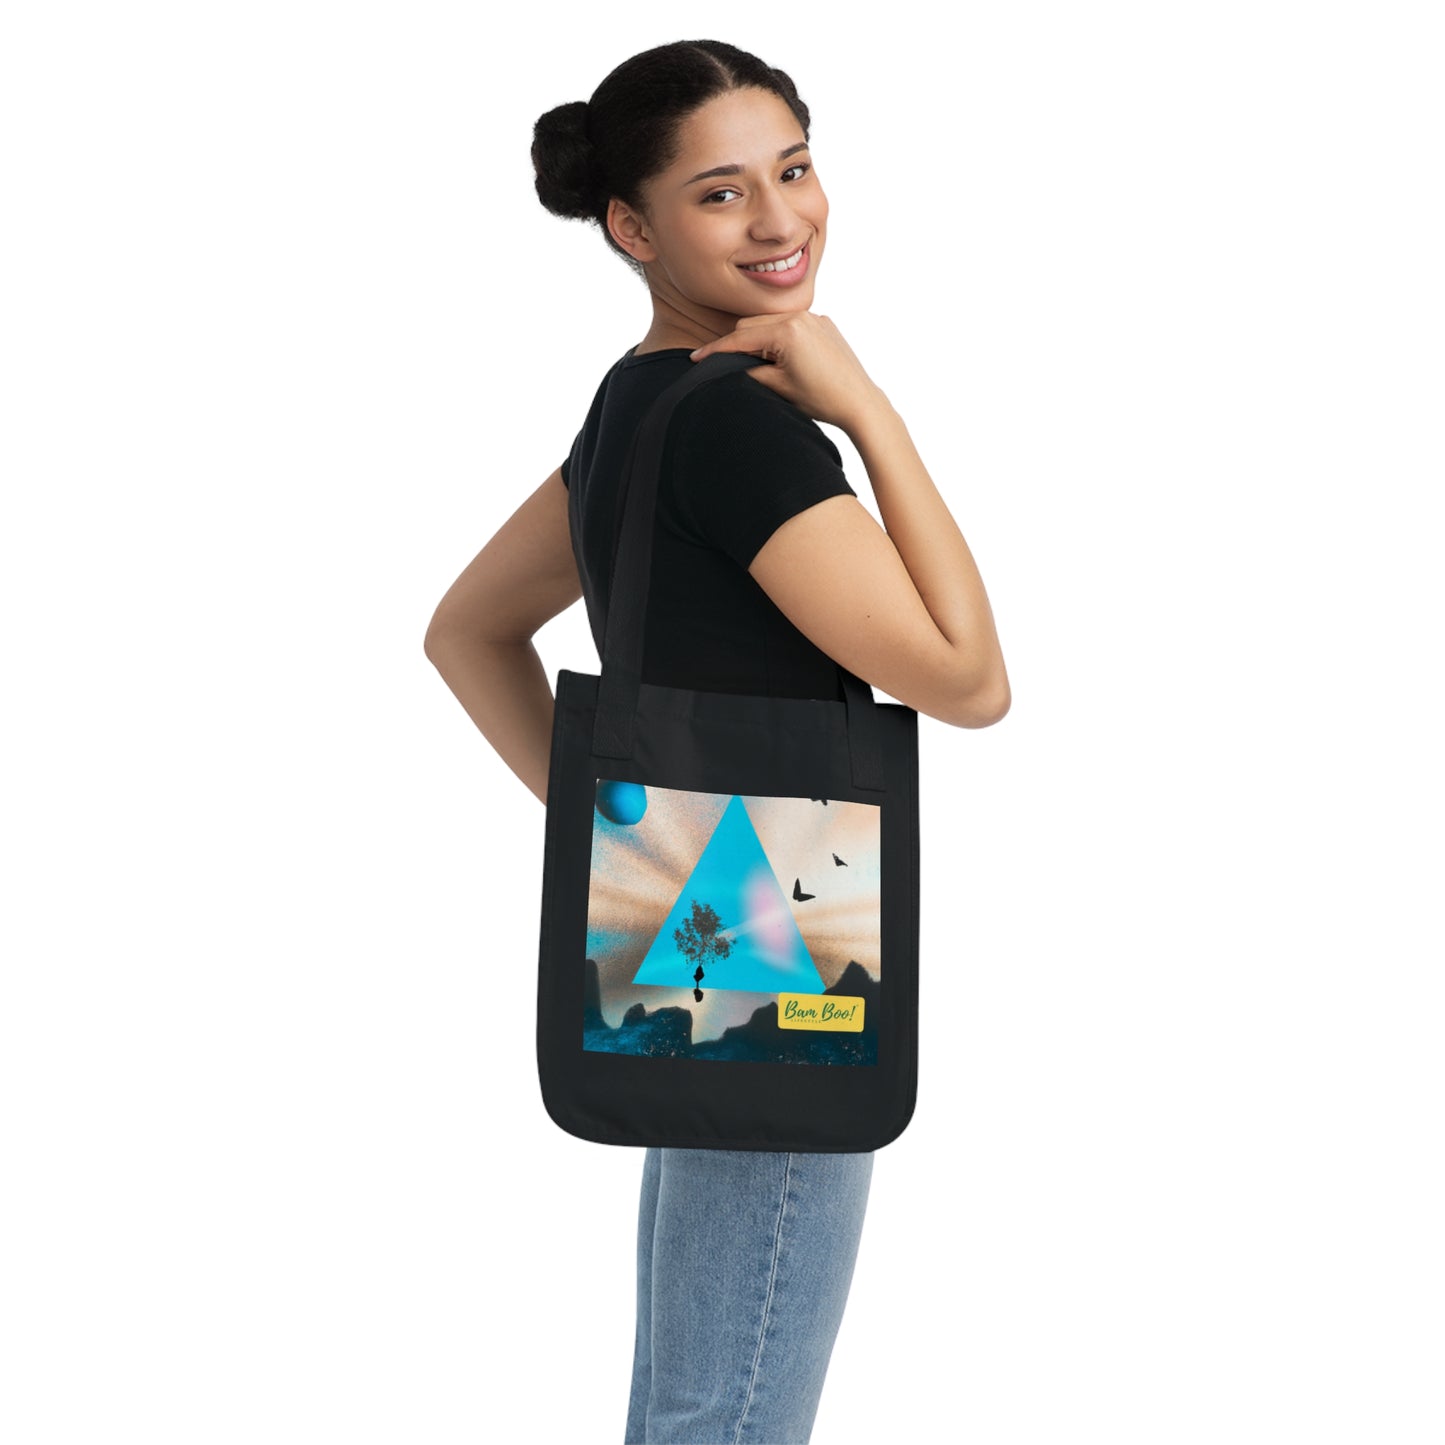 Dreamscaping a Past: Recreating Childhood Memories in Surreal Landscapes - Bam Boo! Lifestyle Eco-friendly Tote Bag